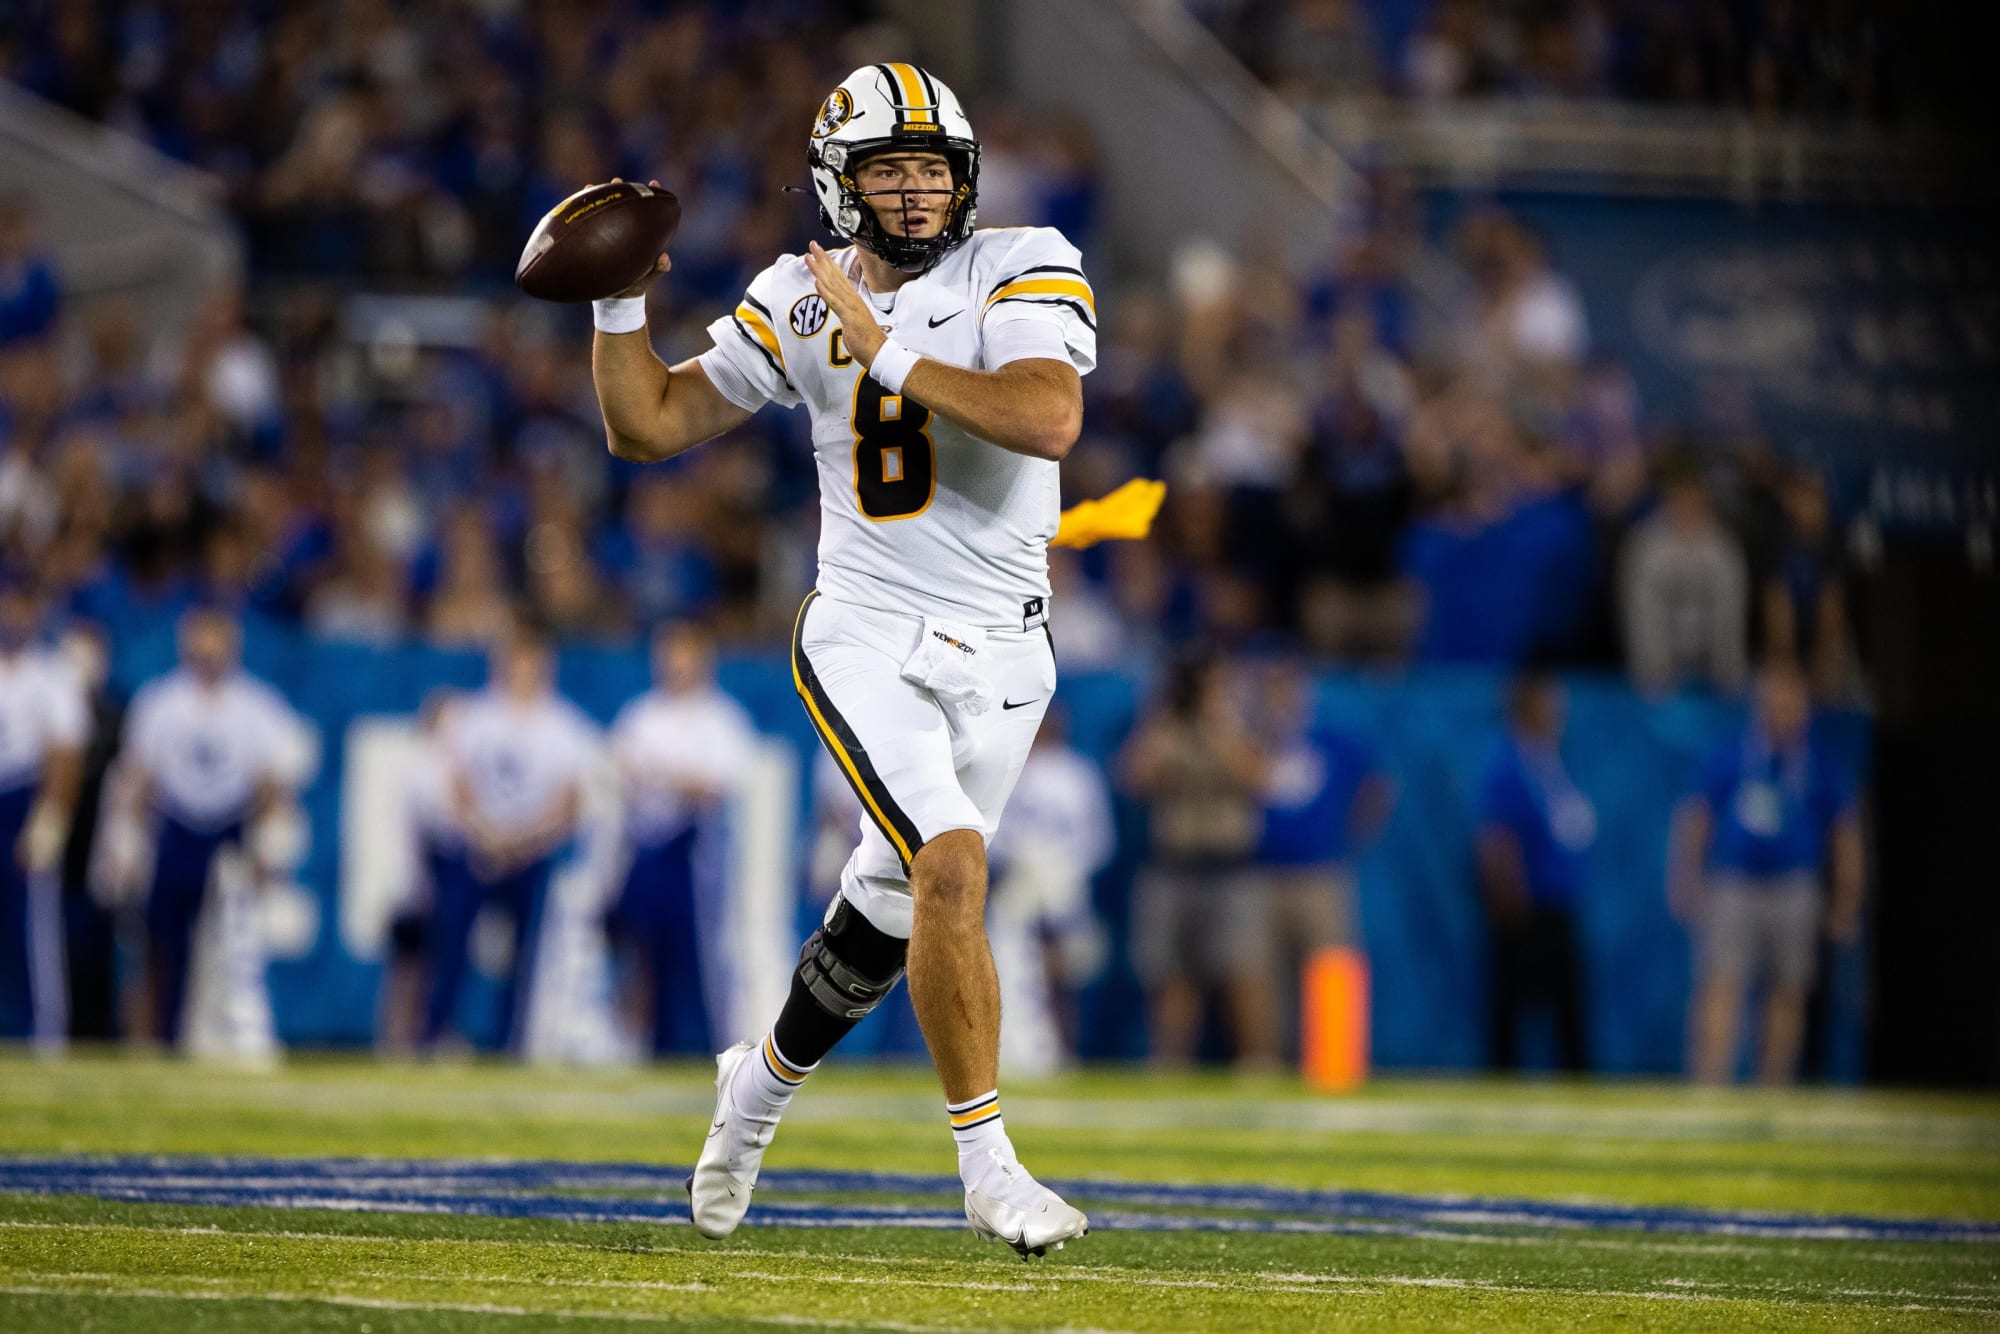 Missouri Football Why the Tigers are optimistic despite loss to UK